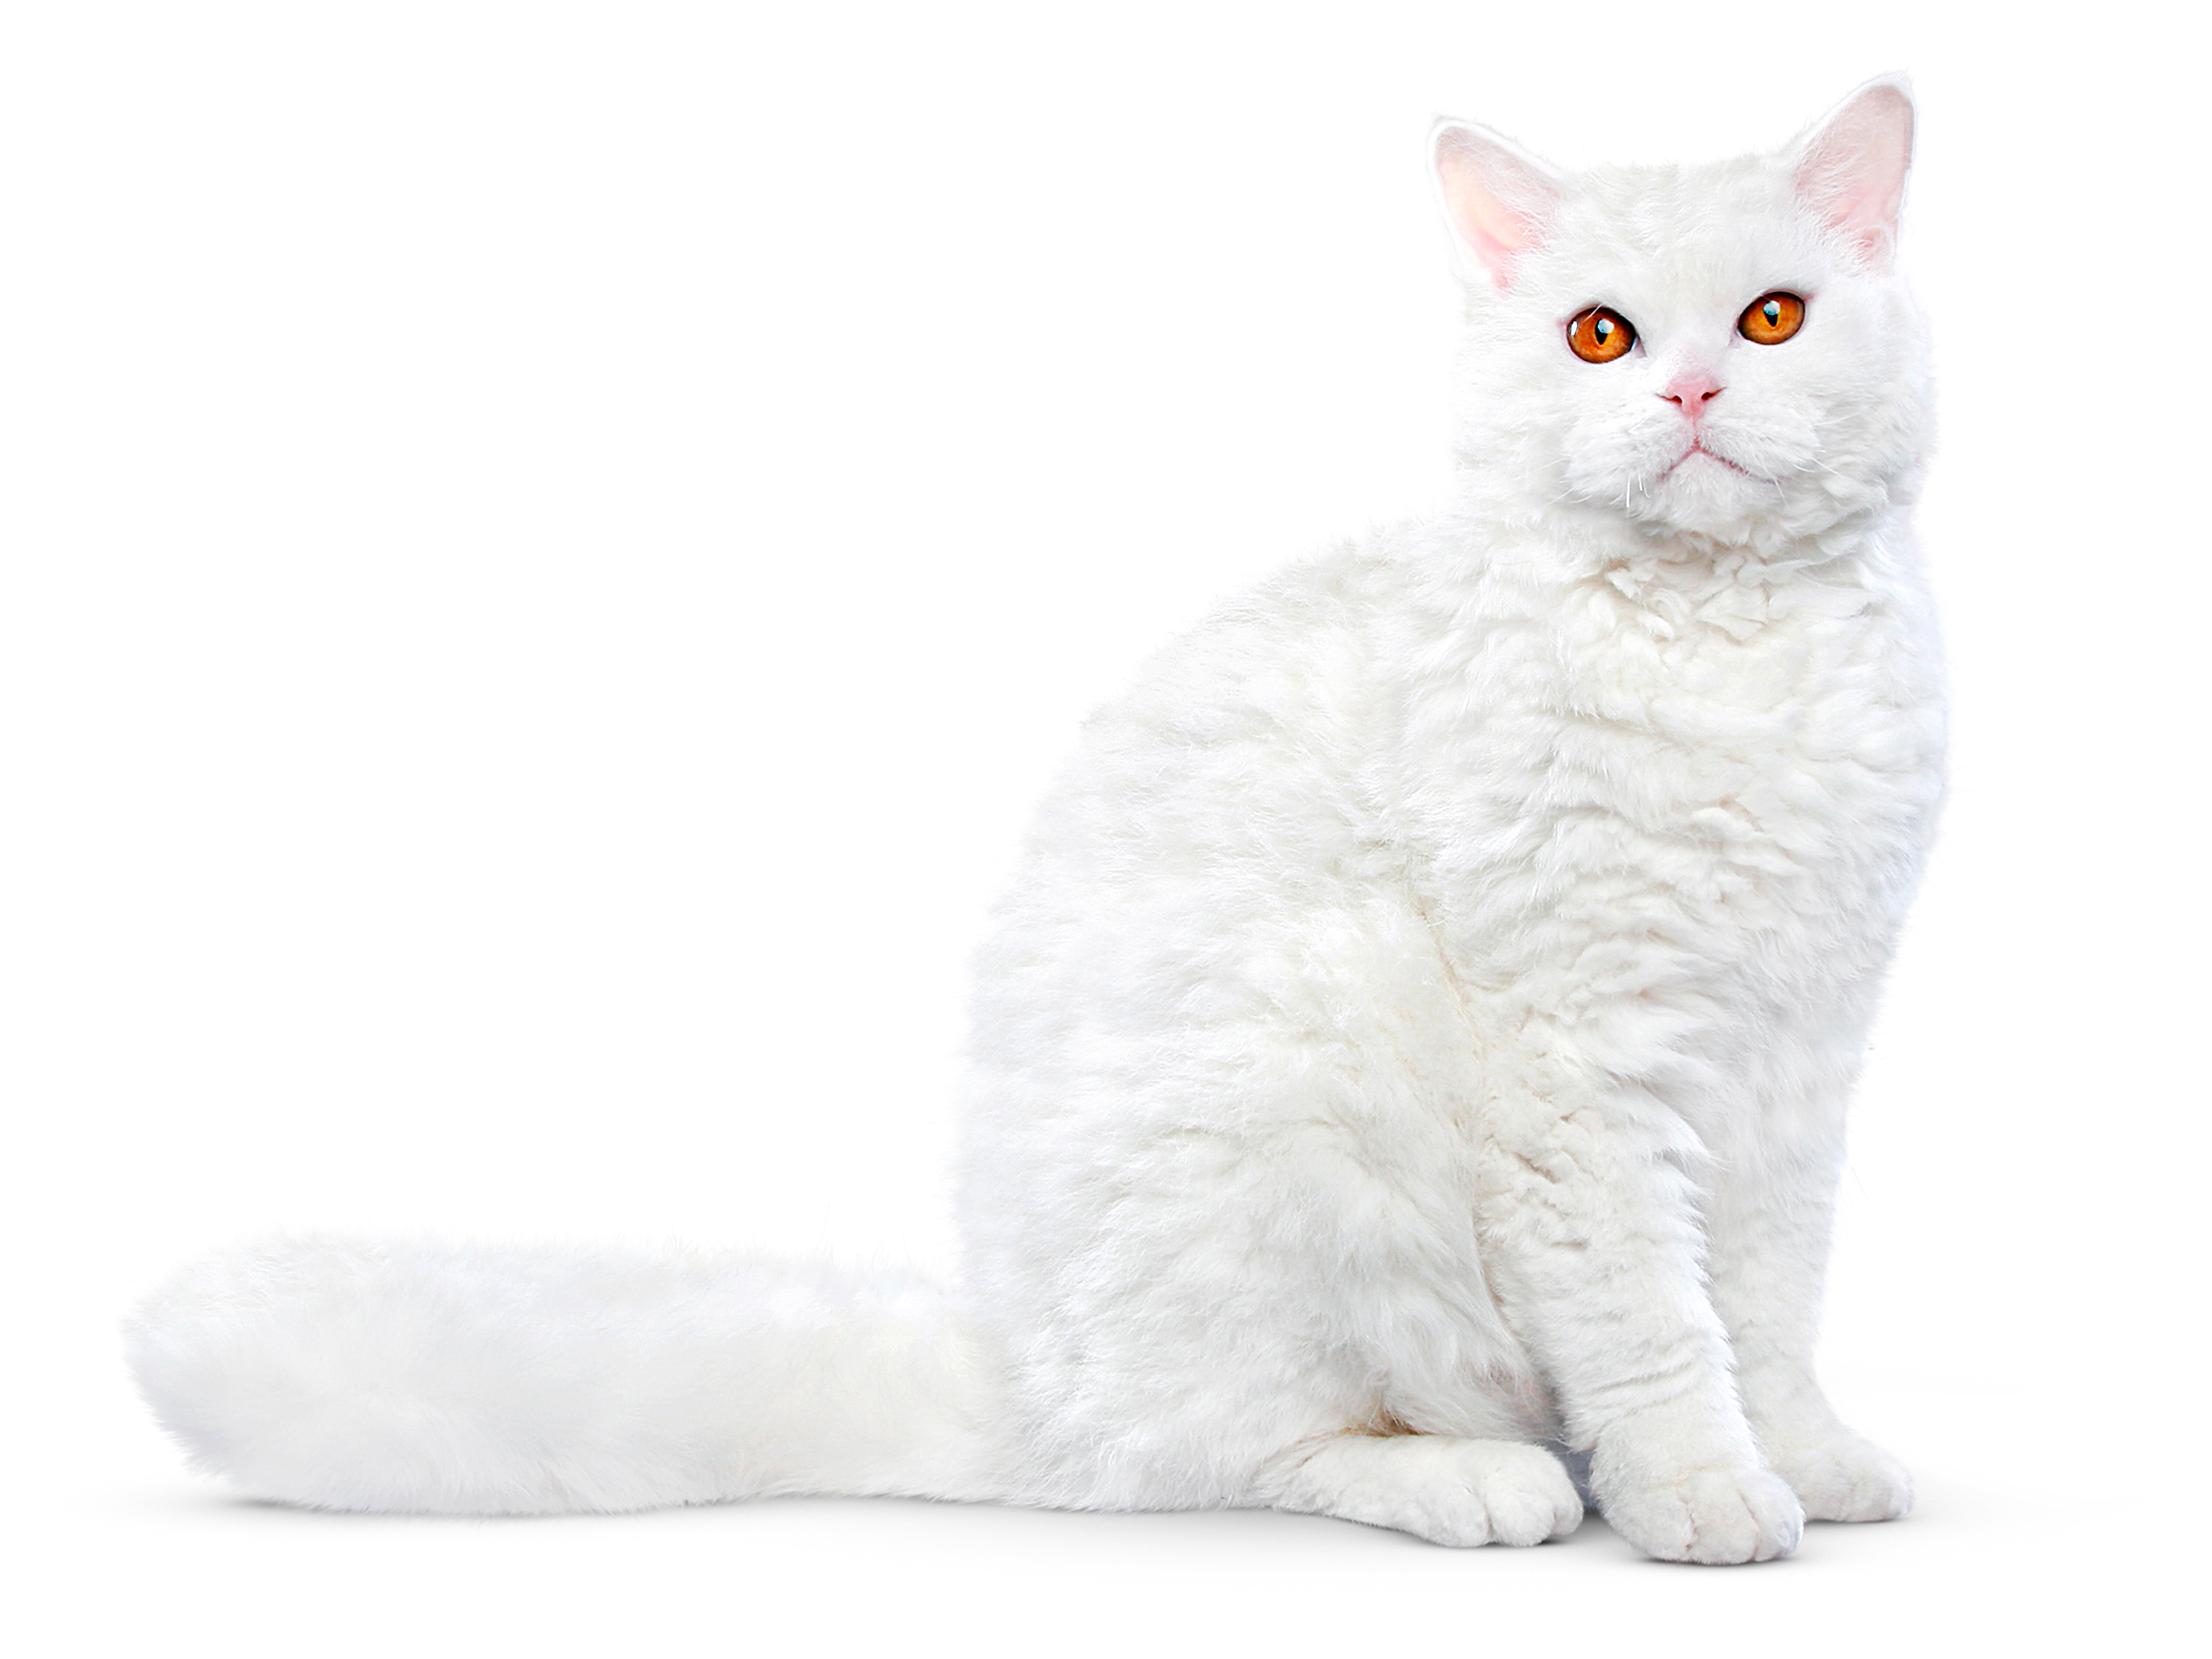 Selkirk rex adult black and white